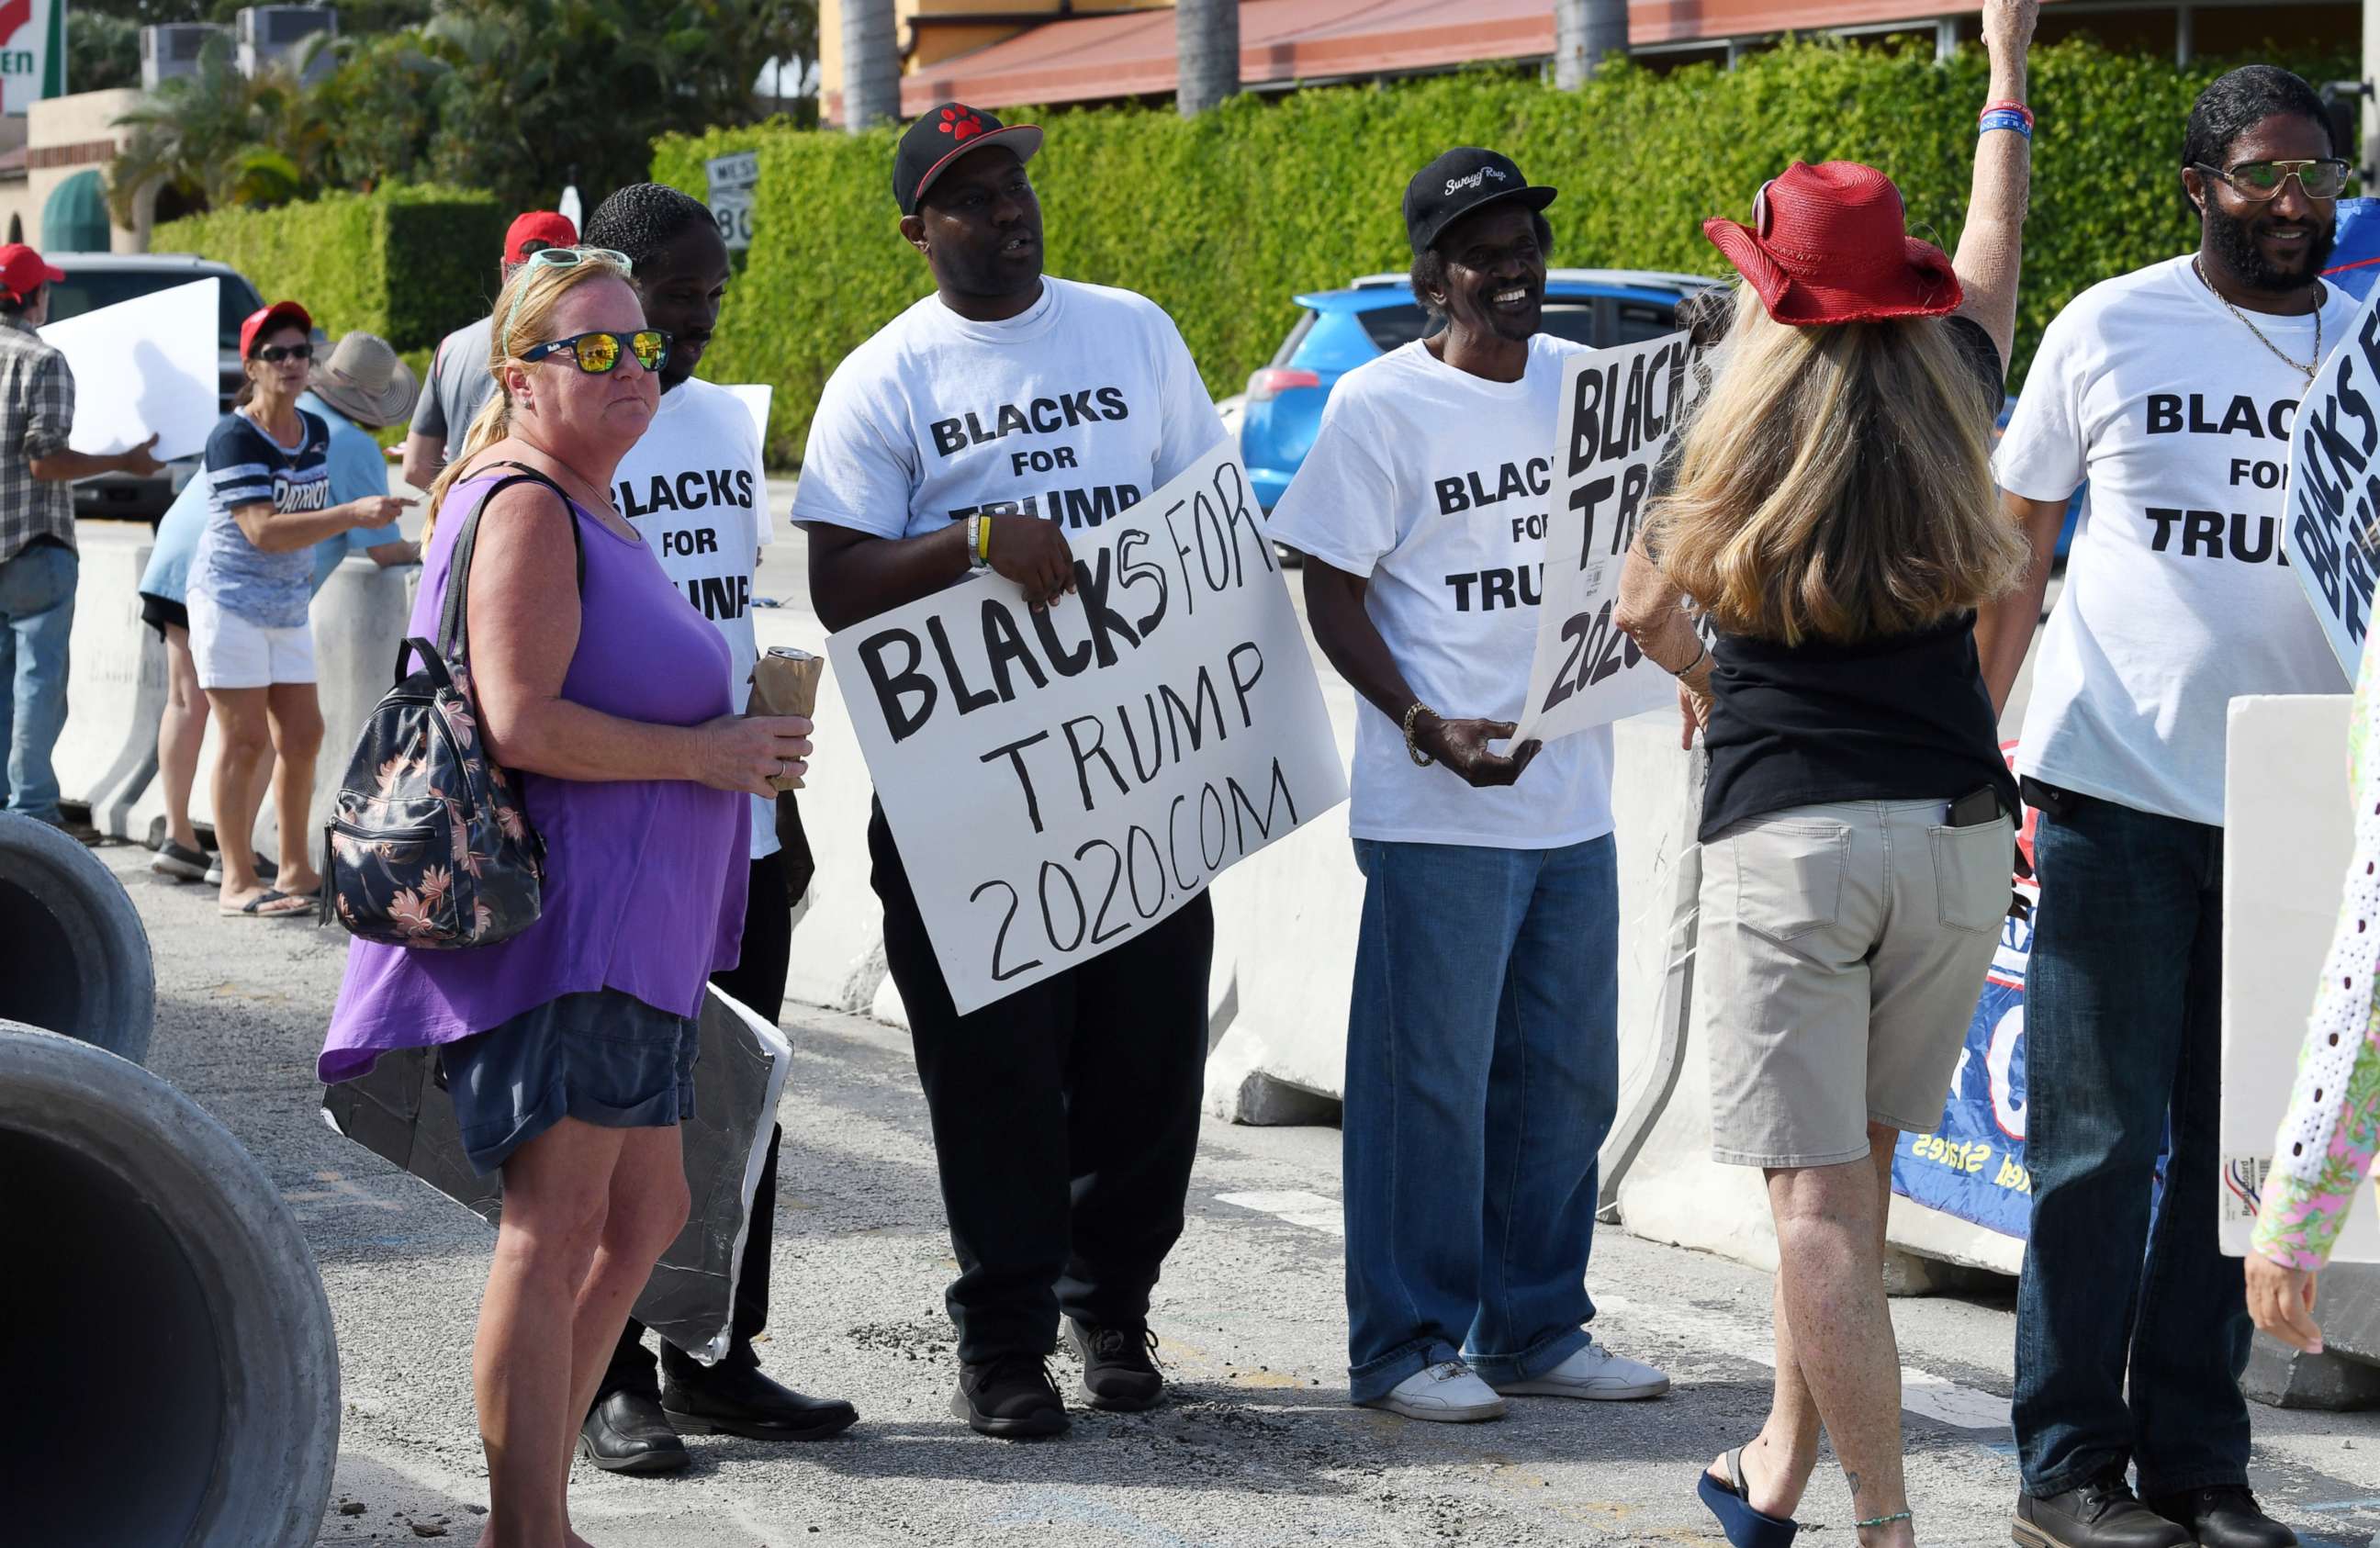 PHOTO: People holding "Blacks for Trump" signs gather along Southern Boulevard as President Donald Trump's motorcade returns to Mar-a-Lago from the Trump International Golf Club located in West Palm Beach, Jan. 18, 2020